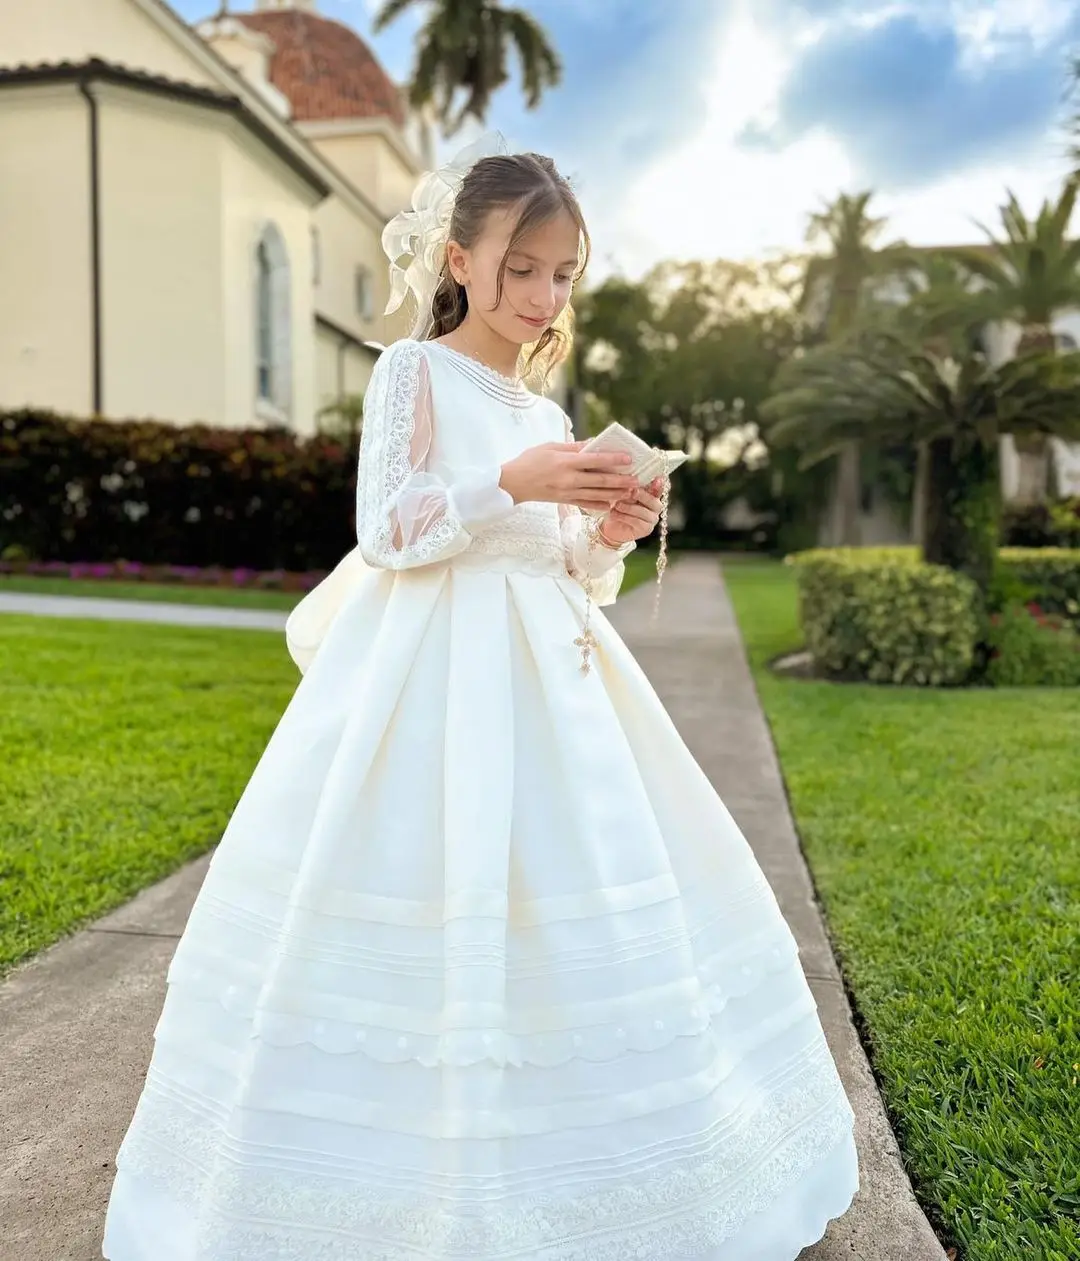 FATAPAESE First Communion Dress Made with Satin Fabric Long Sleeves with Vintage-like Laces Bow and Covered Buttons for Closure